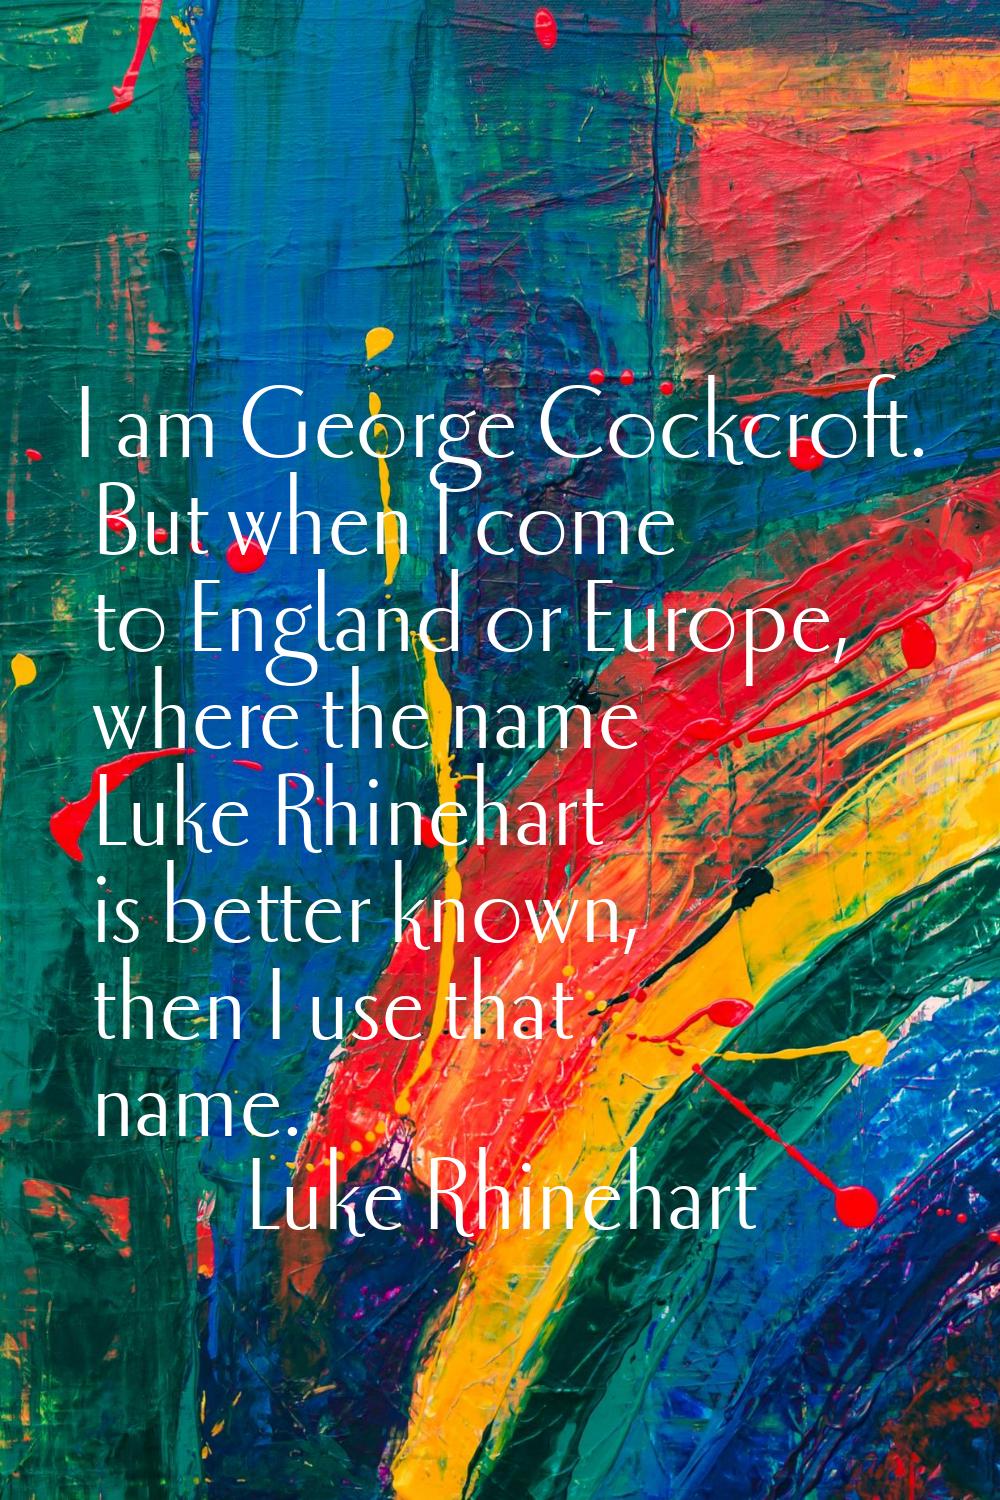 I am George Cockcroft. But when I come to England or Europe, where the name Luke Rhinehart is bette